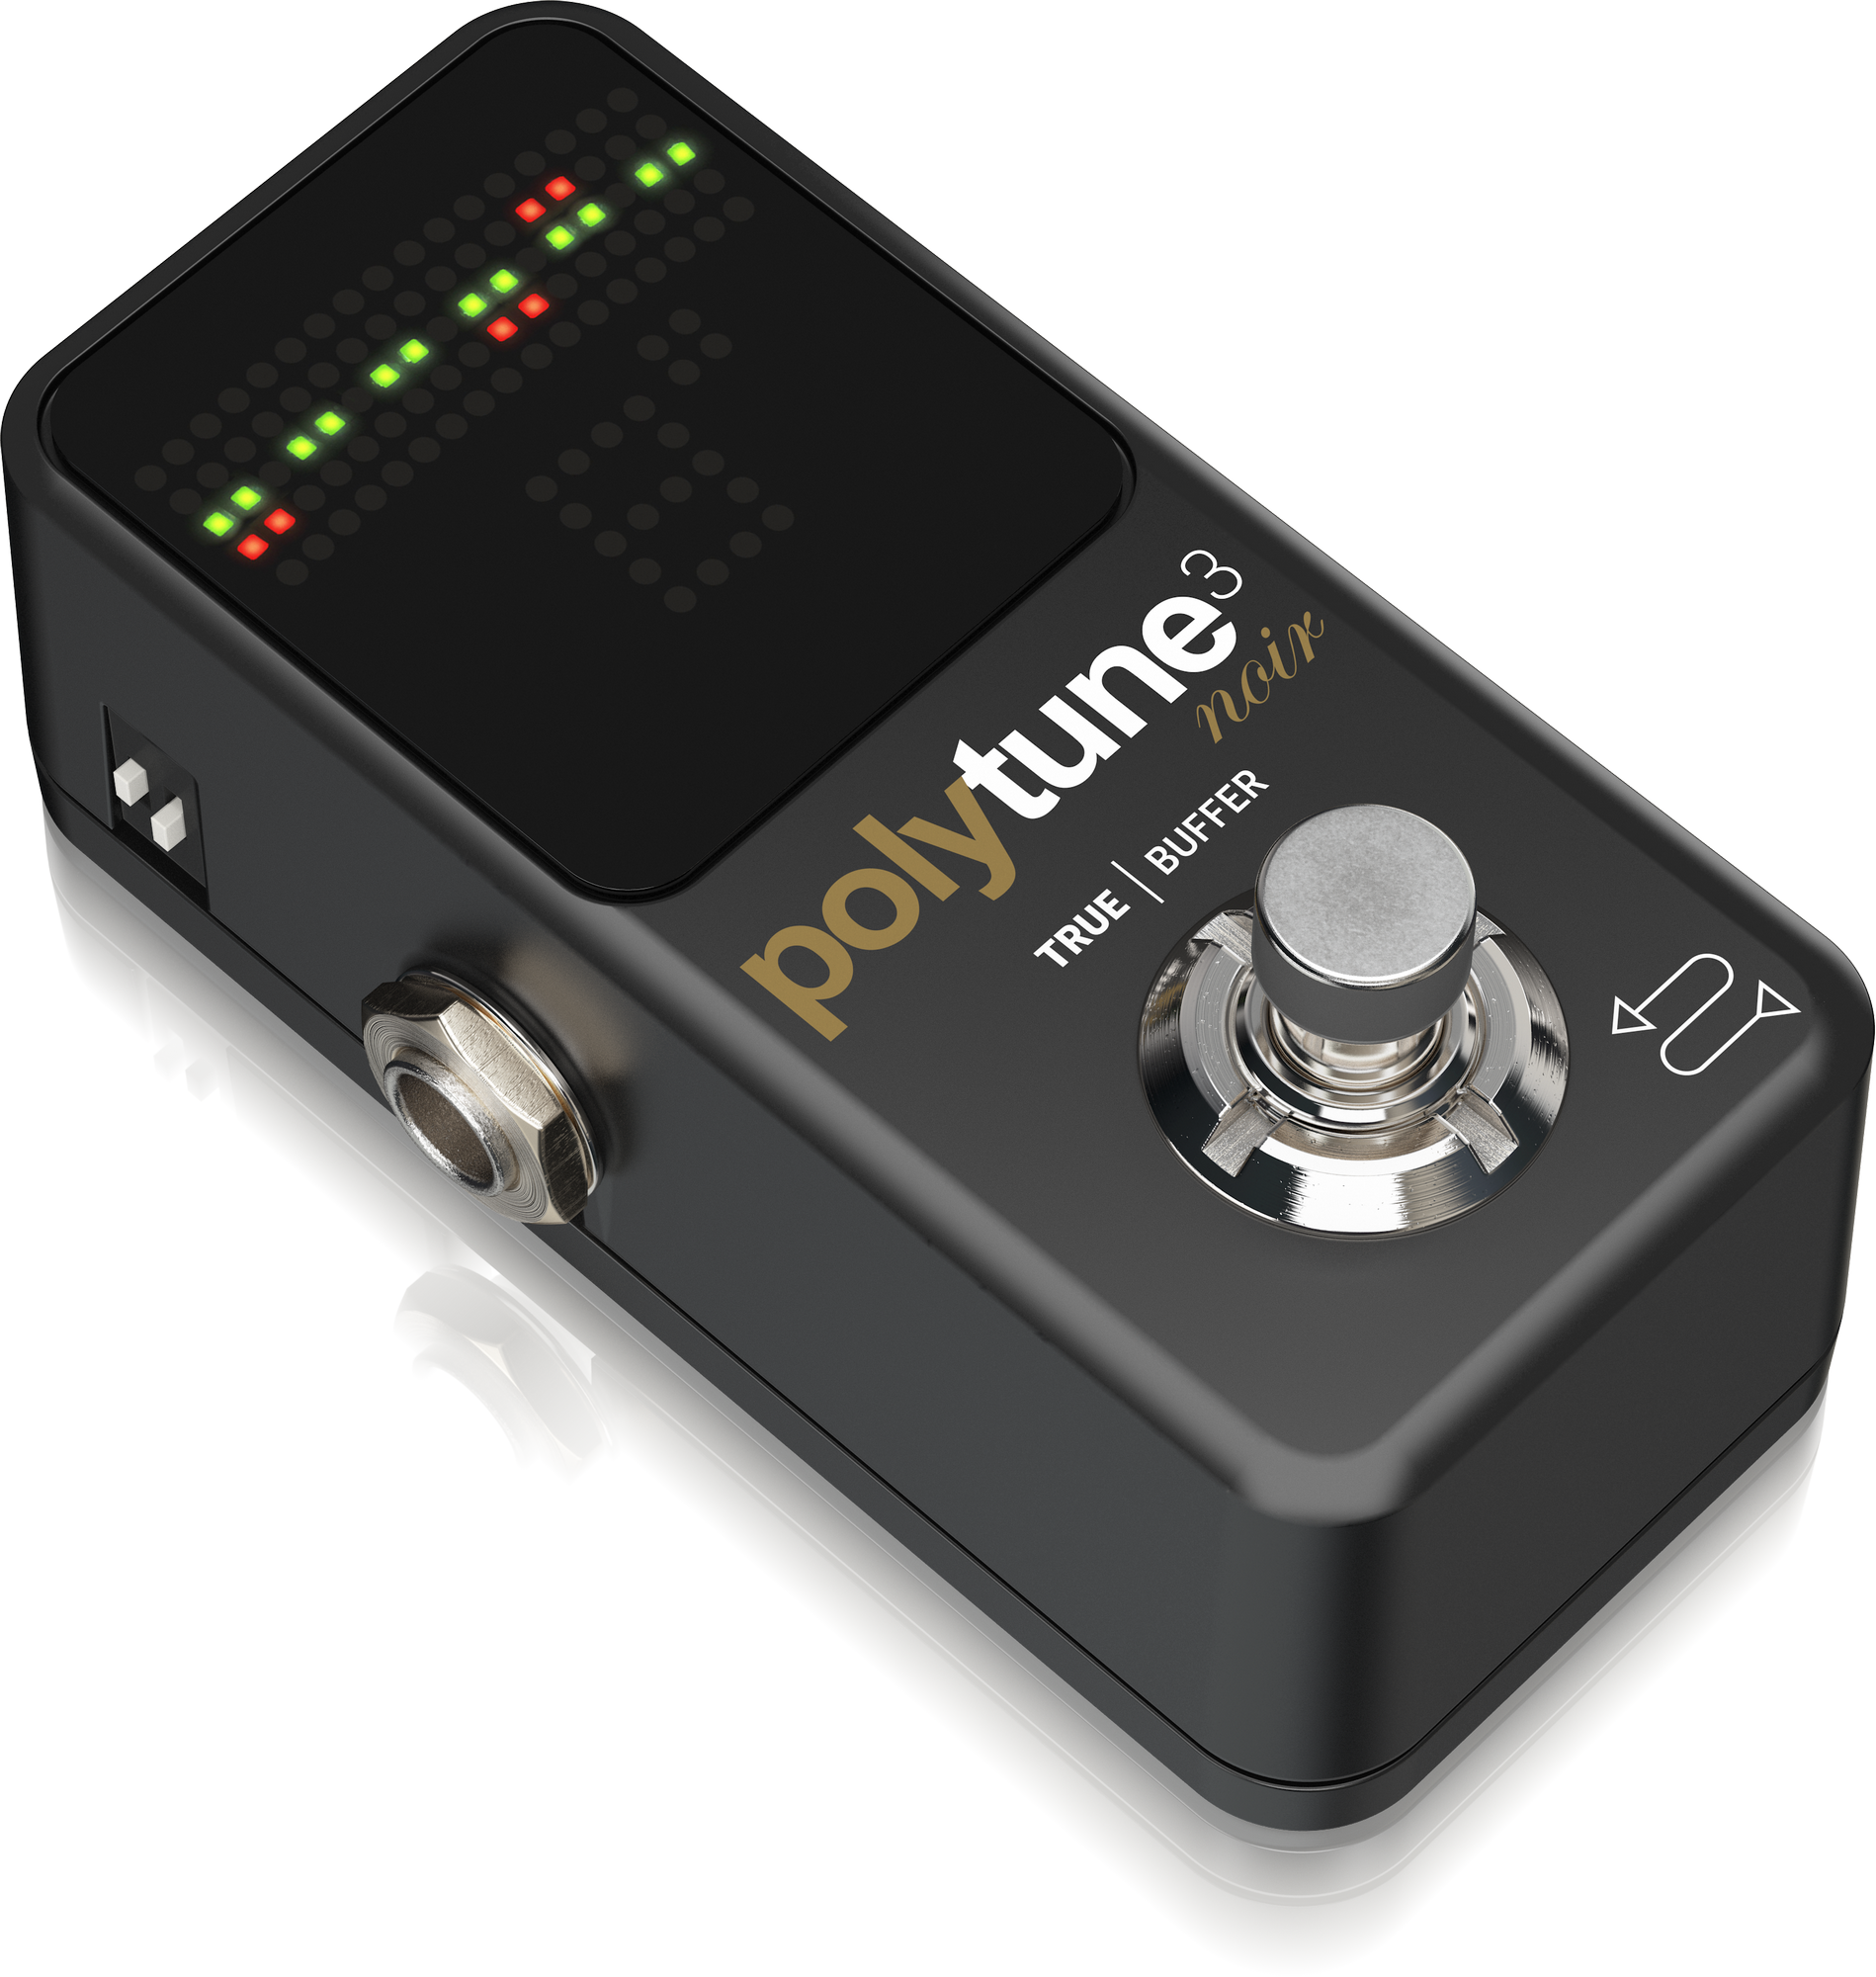 TC Electronic Polytune 3 Noir Tiny Polyphonic Tuner With Multiple Tuning Modes And Built-in Bonafide Buffer, TC ELECTRONIC, TUNER & METRONOME, tc-electronic-tuner-metronome-tc-polytune-3-noir, ZOSO MUSIC SDN BHD